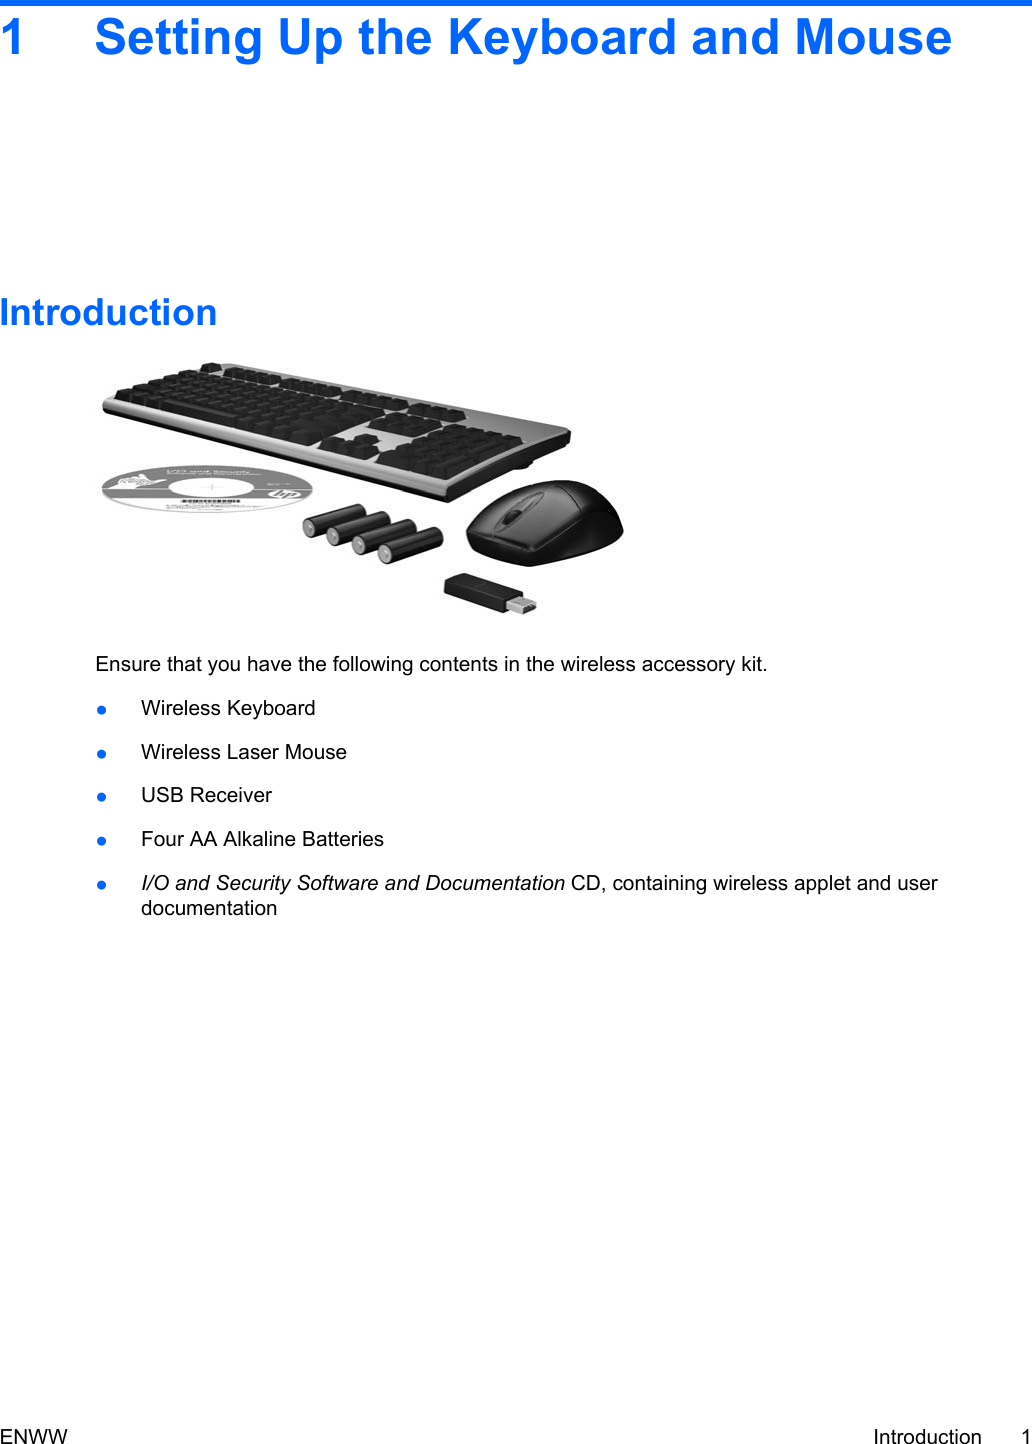 1 Setting Up the Keyboard and MouseIntroductionEnsure that you have the following contents in the wireless accessory kit.●Wireless Keyboard●Wireless Laser Mouse●USB Receiver●Four AA Alkaline Batteries●I/O and Security Software and Documentation CD, containing wireless applet and userdocumentationENWW Introduction 1